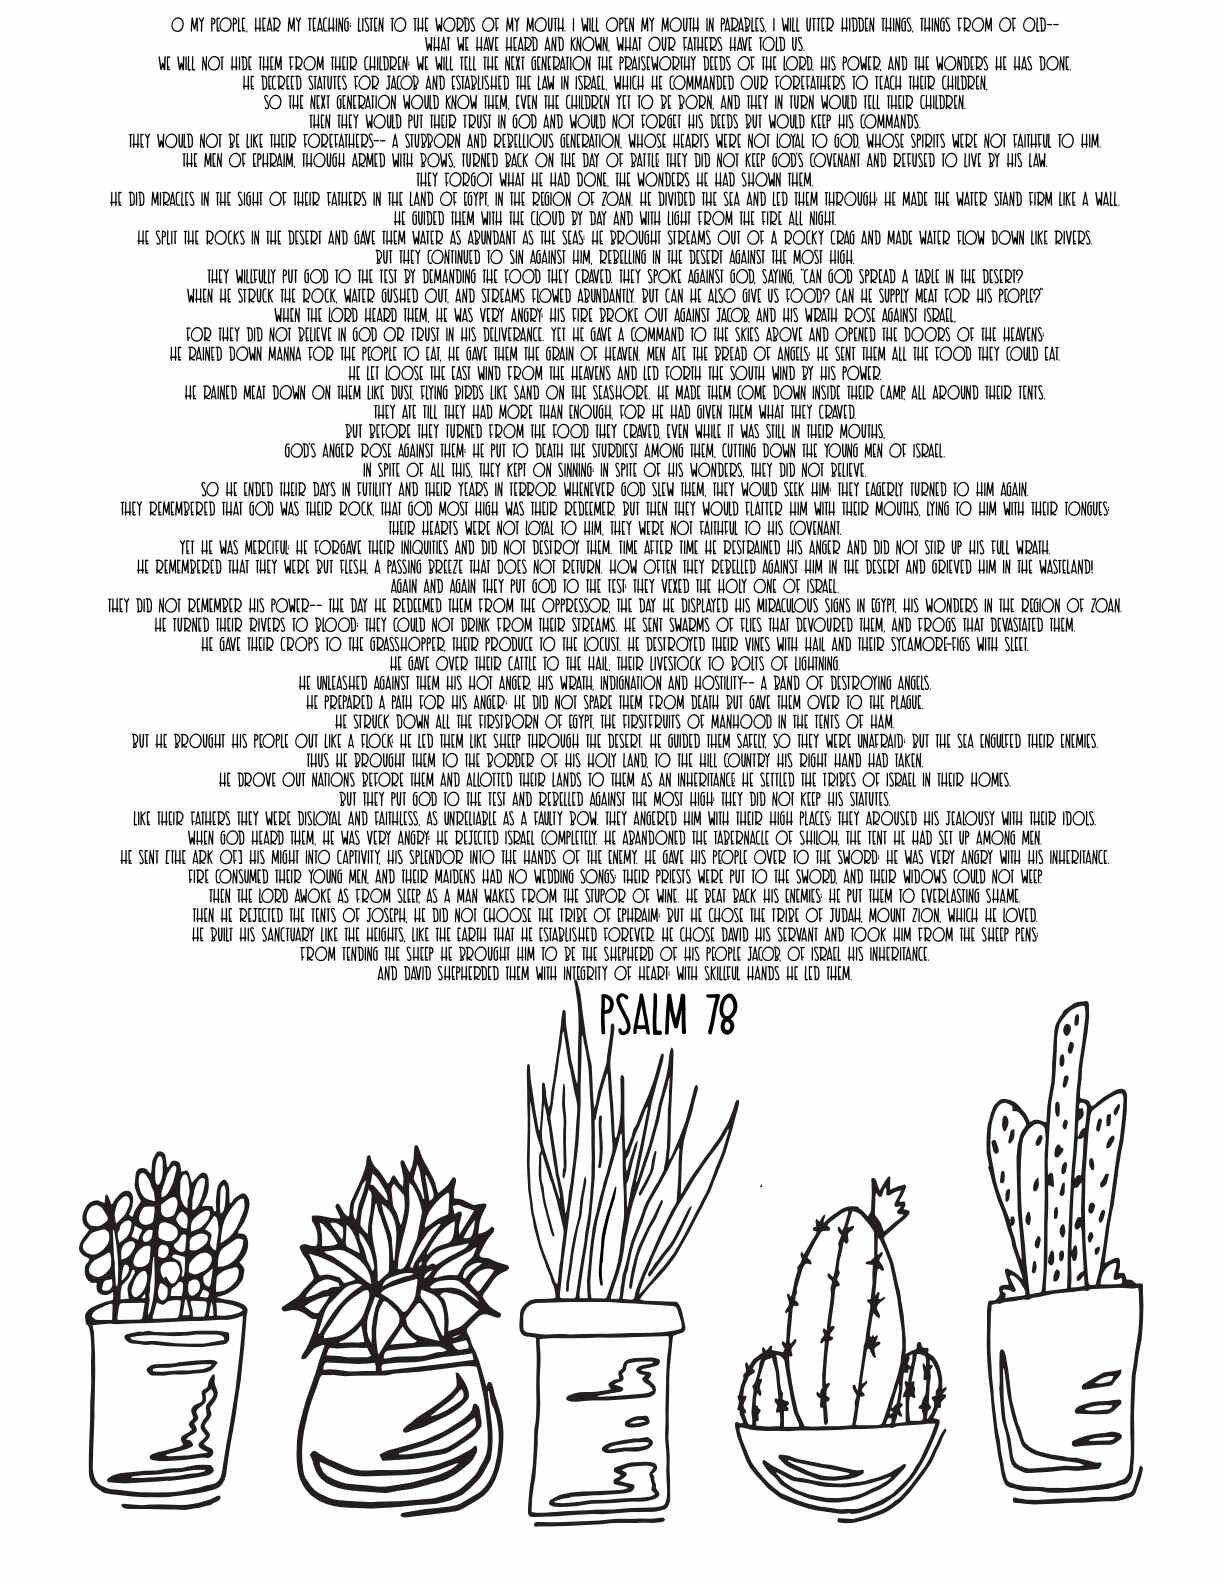 10 Free Printable Psalm Coloring Pages - Download and Color Adult Scripture - Psalm 78CLICK HERE TO DOWNLOAD THIS PAGE FREE